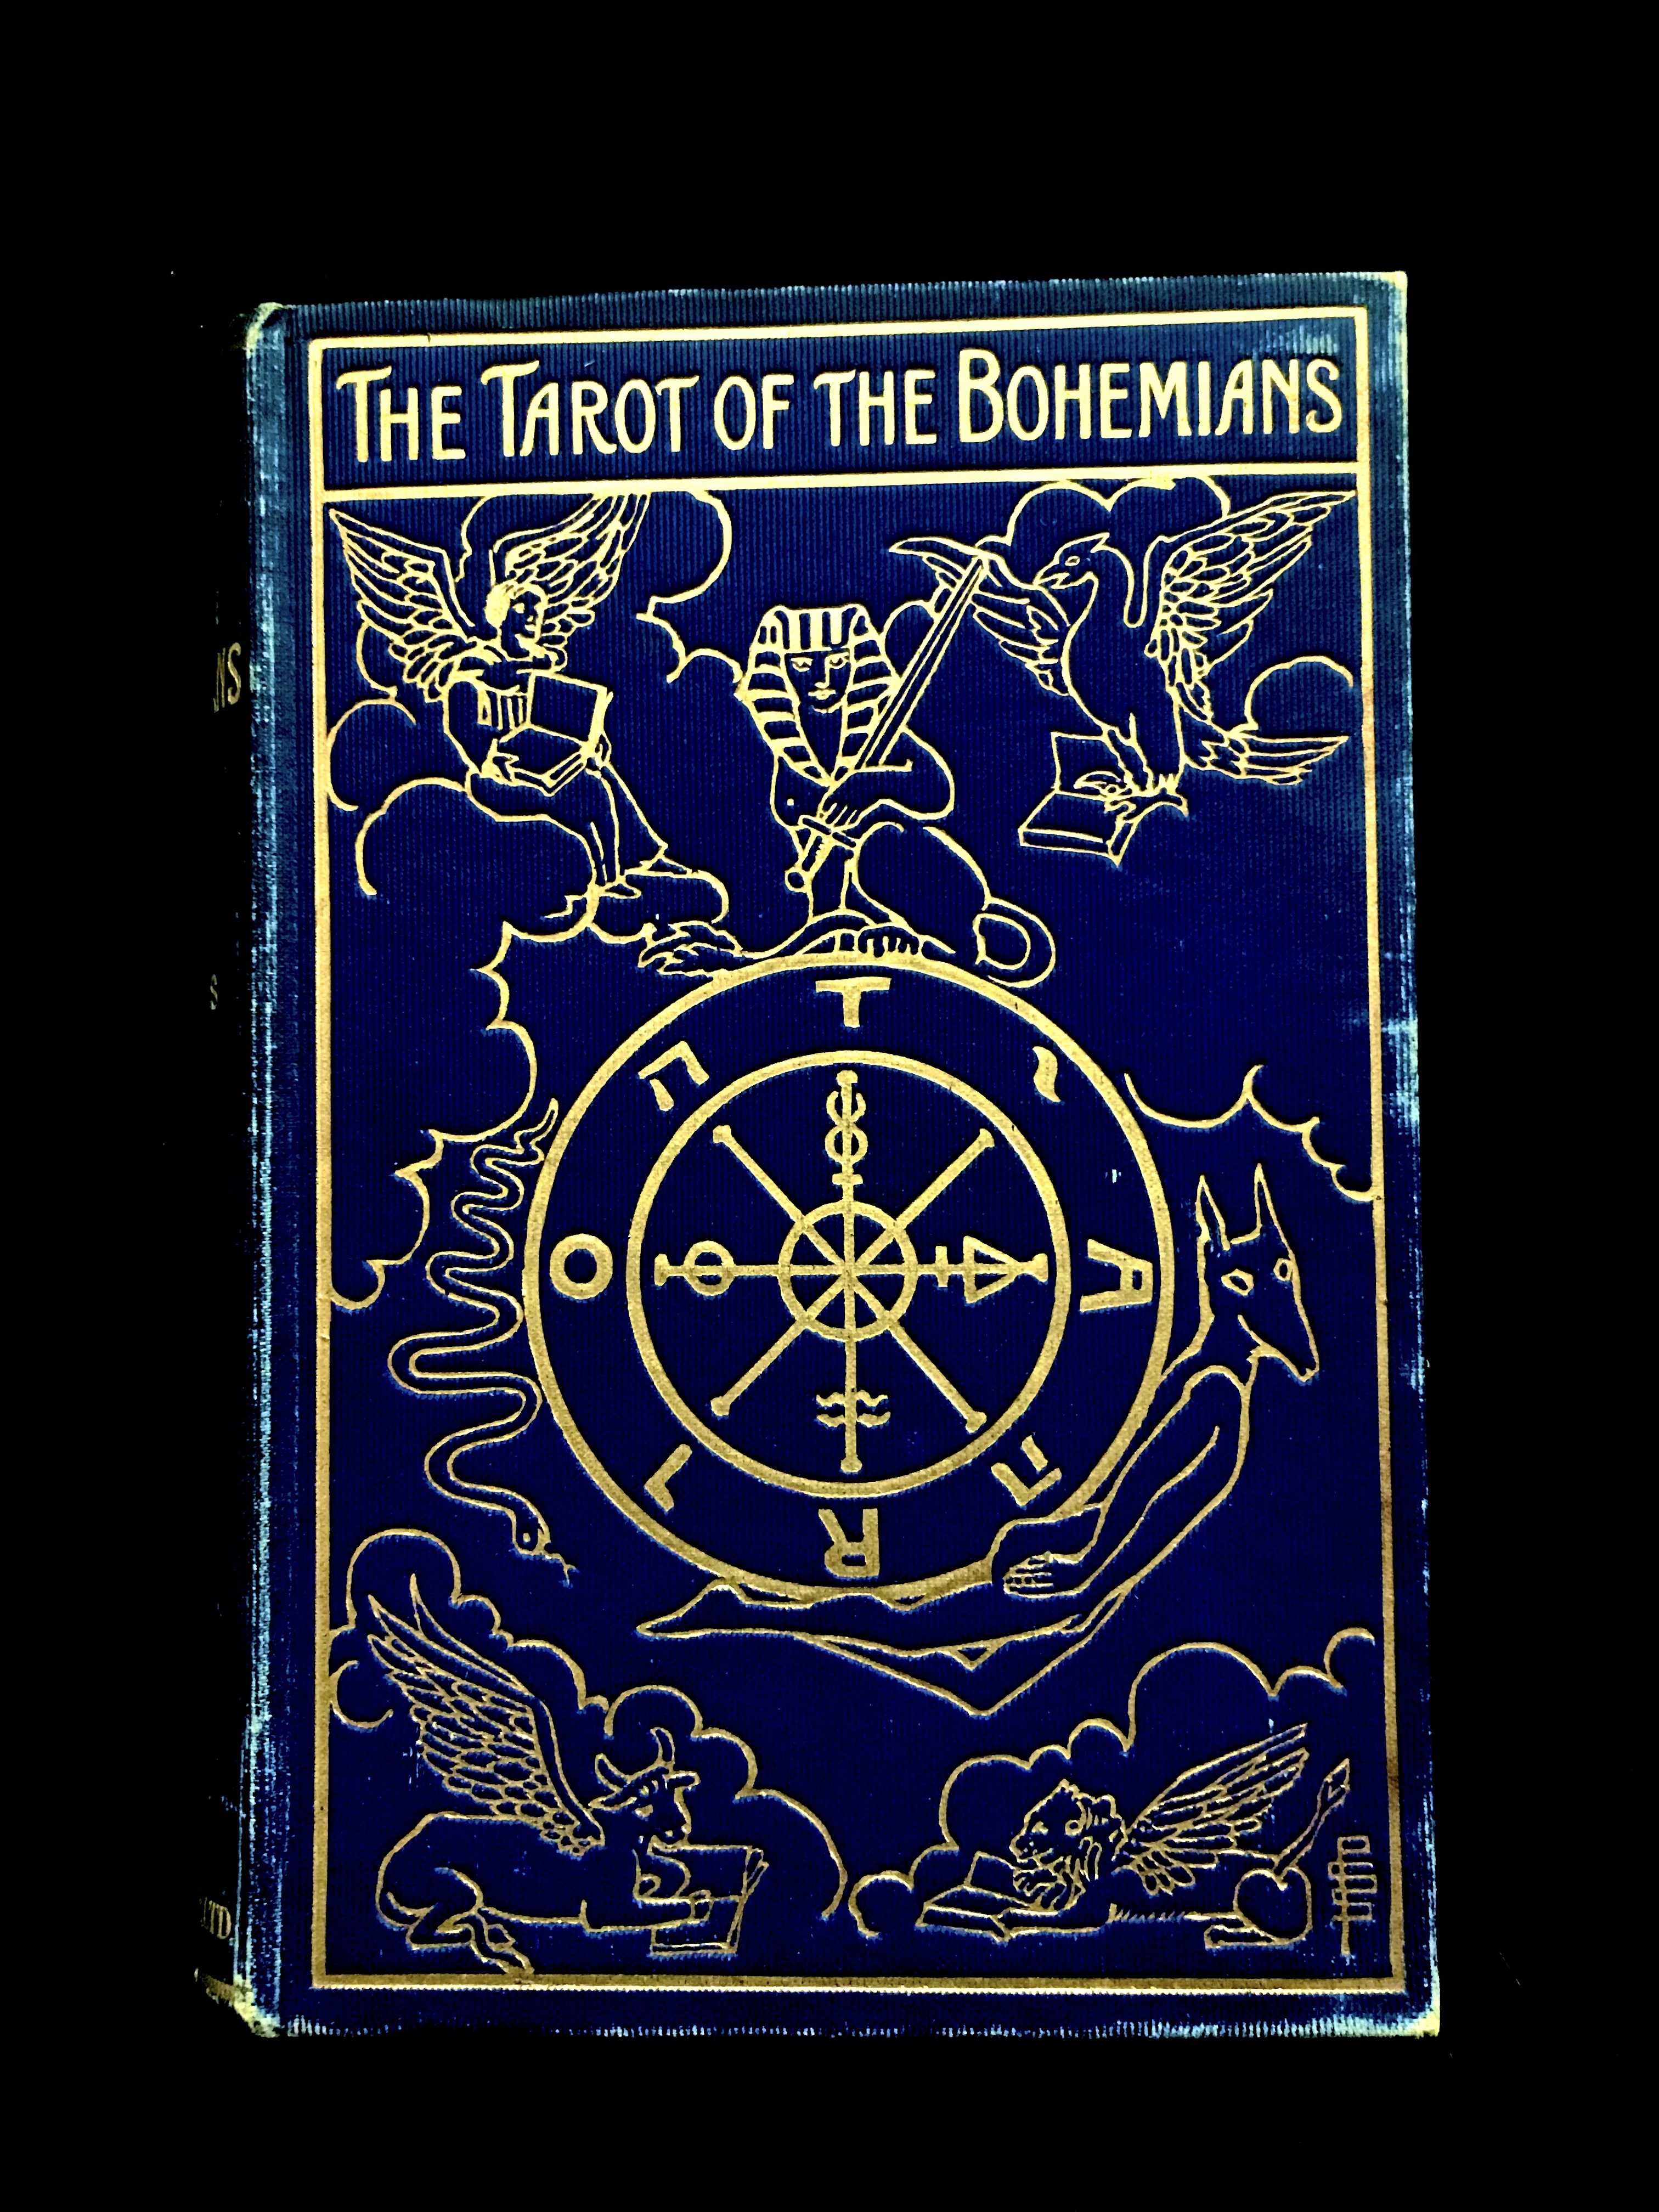 The Tarot of The Bohemians by Papus